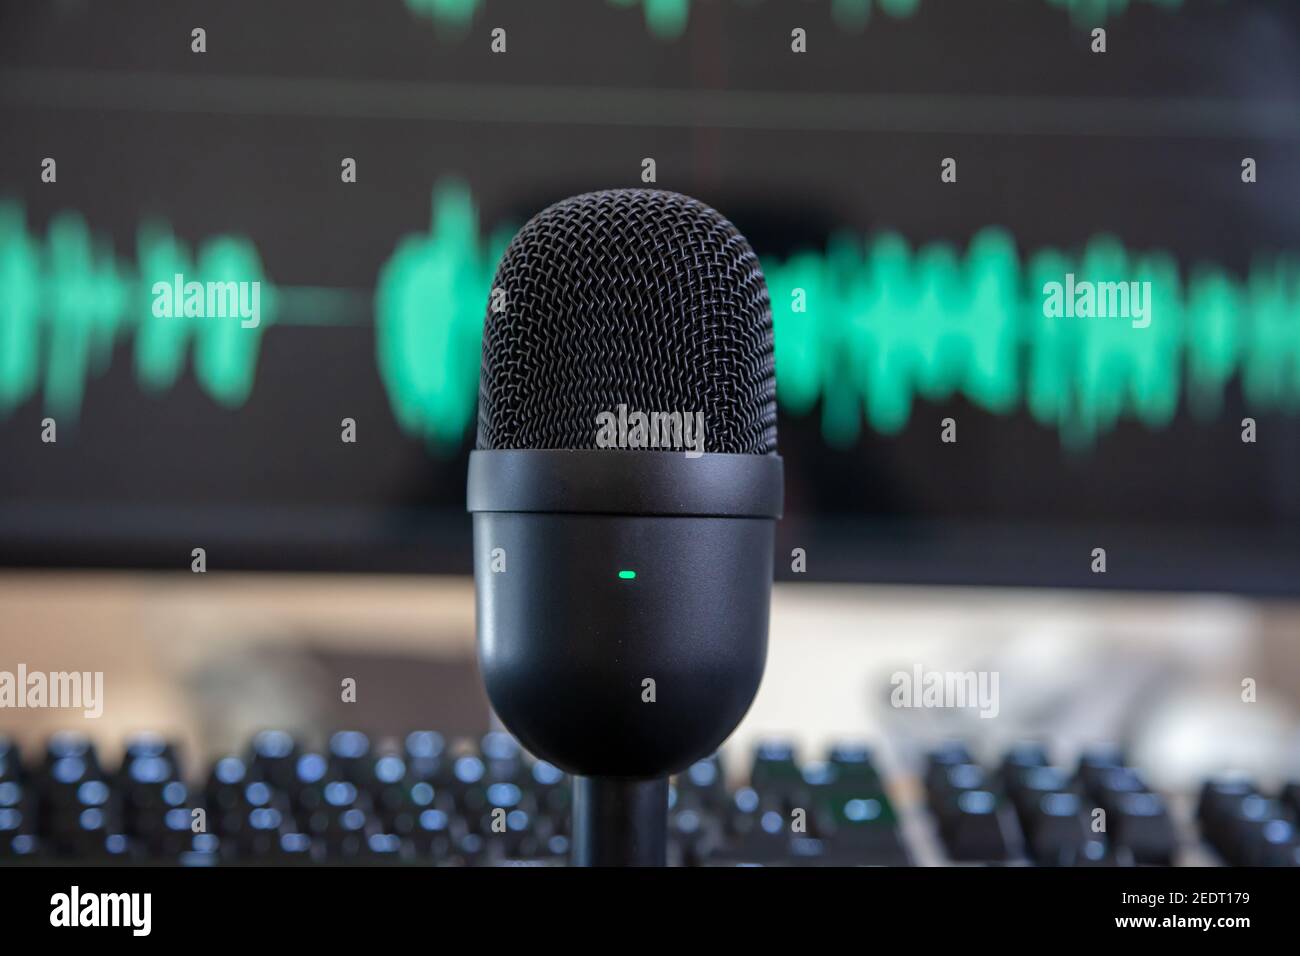 Sound recording concept. Black metallic condenser microphone, blur console and turquoise waveform background. Mike for live audio, music, speech, conc Stock Photo